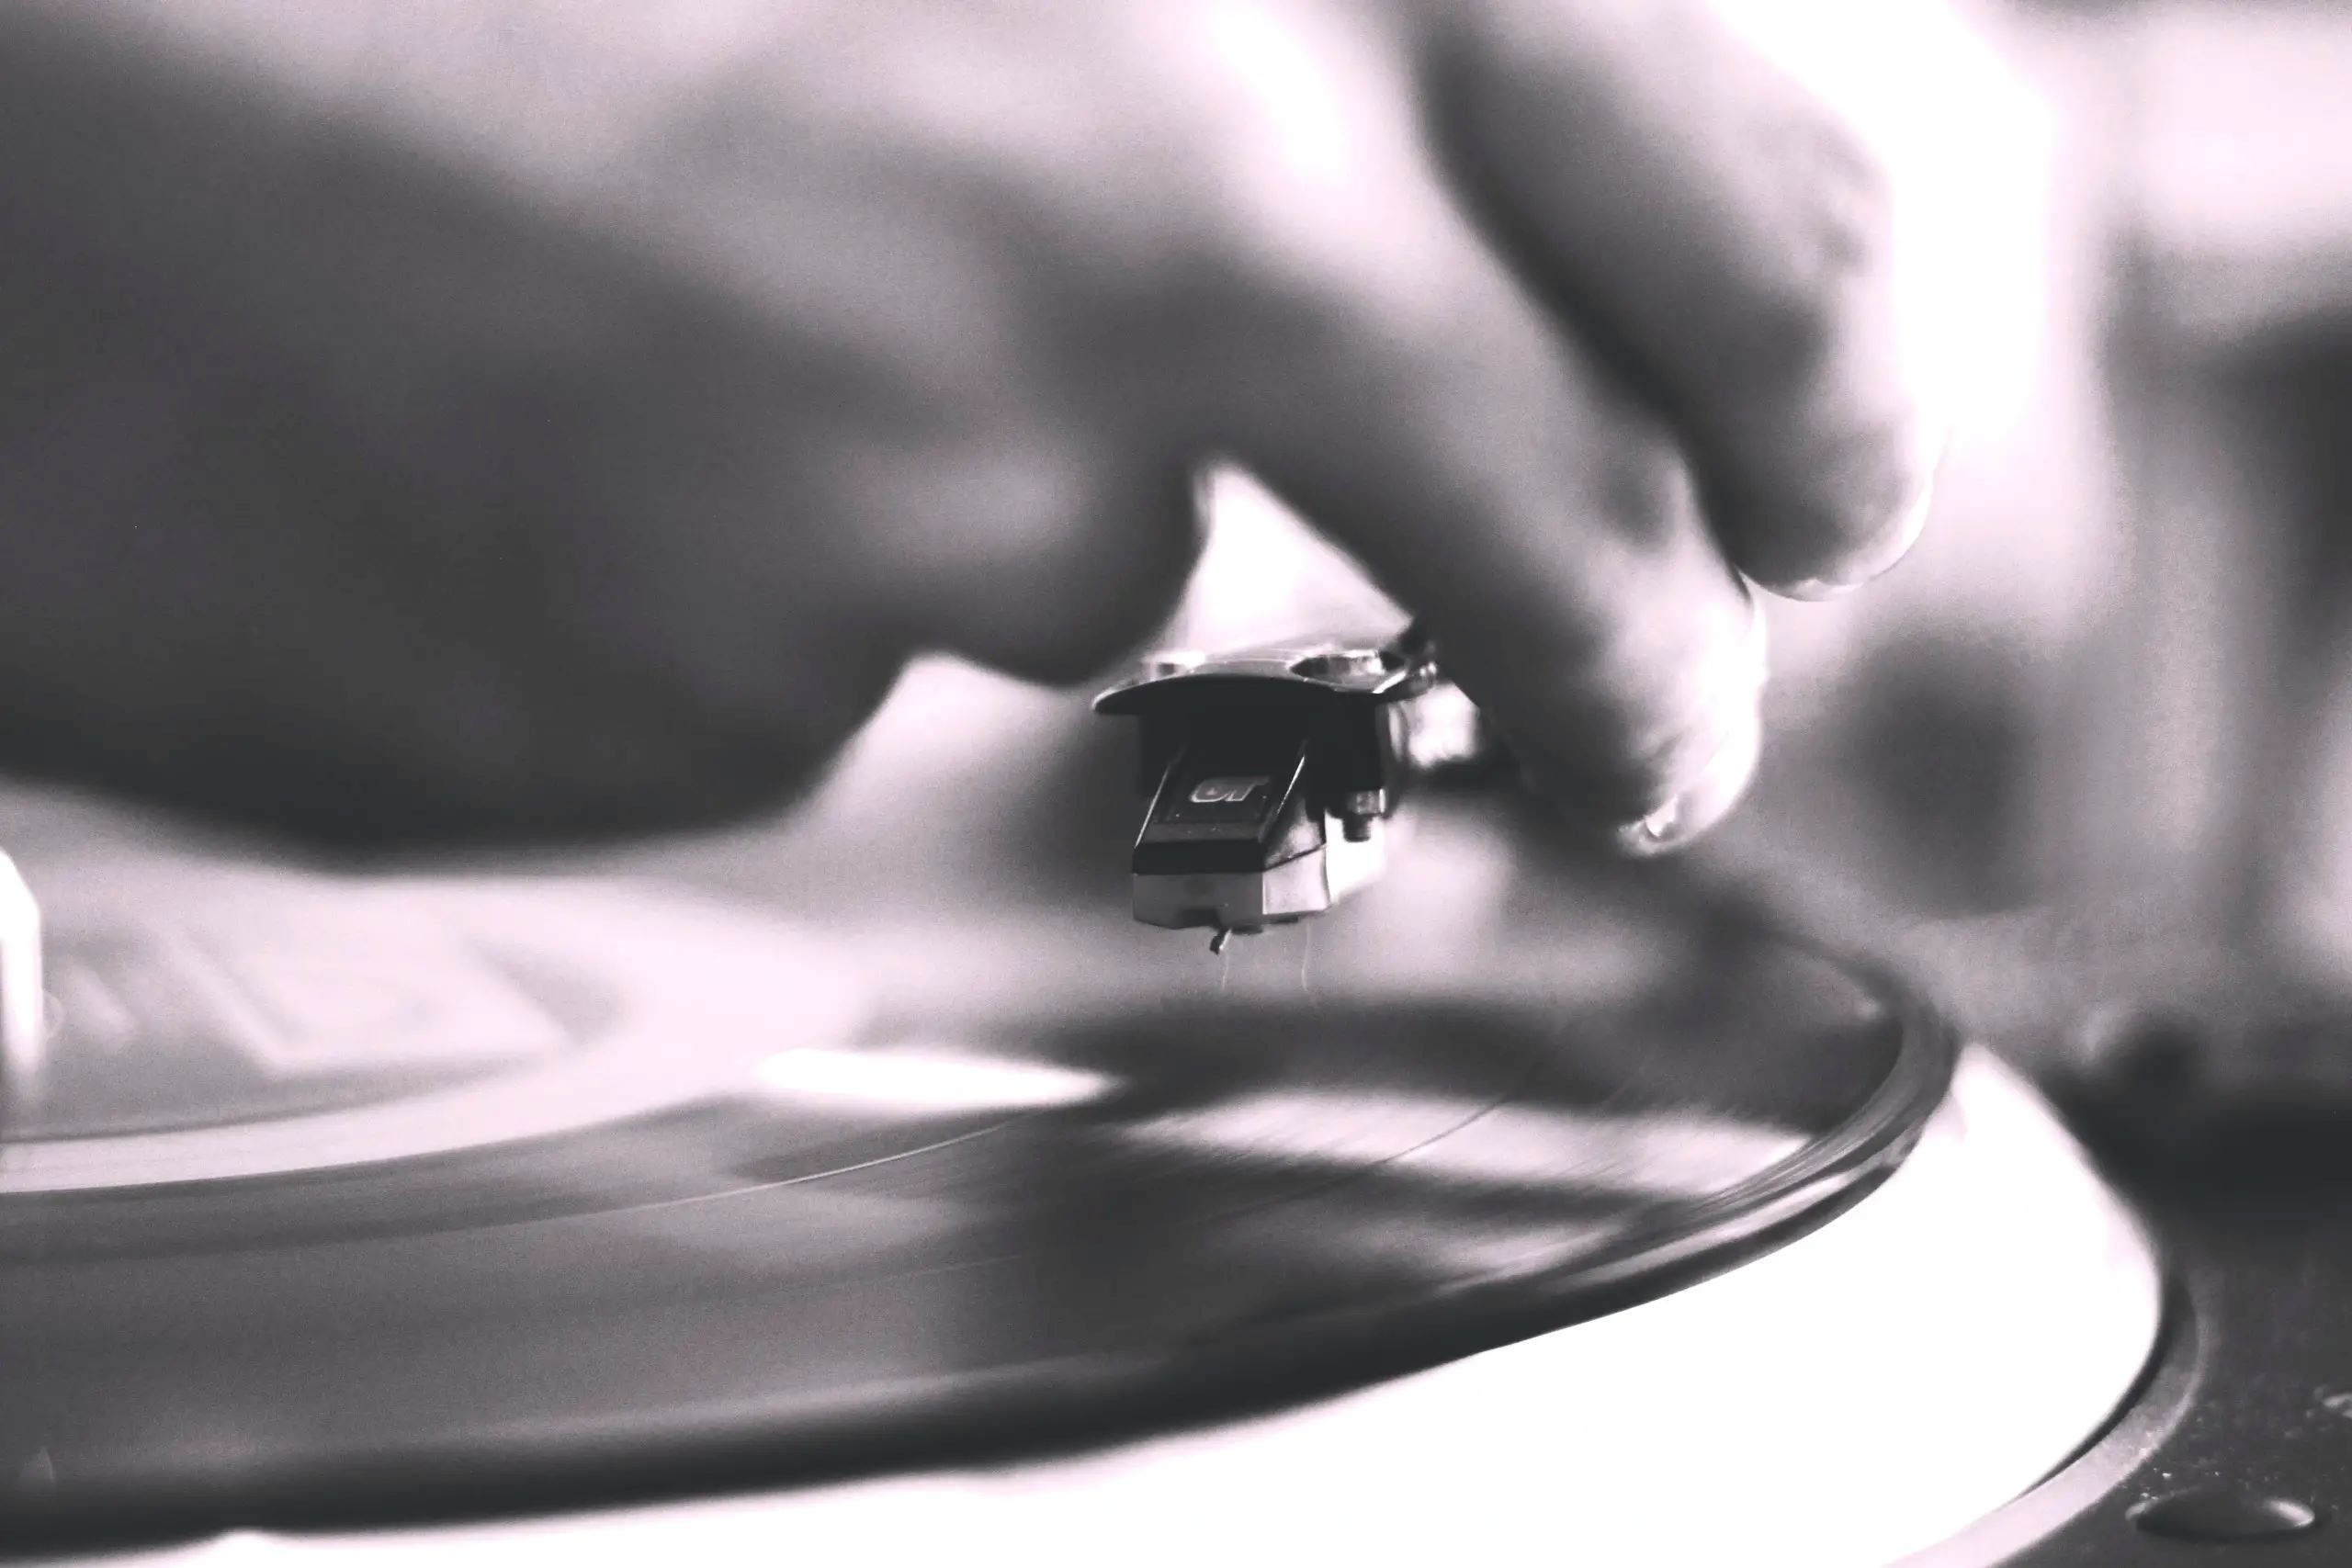 The Ultimate Hack To Clean Your Record Player’s Needle!